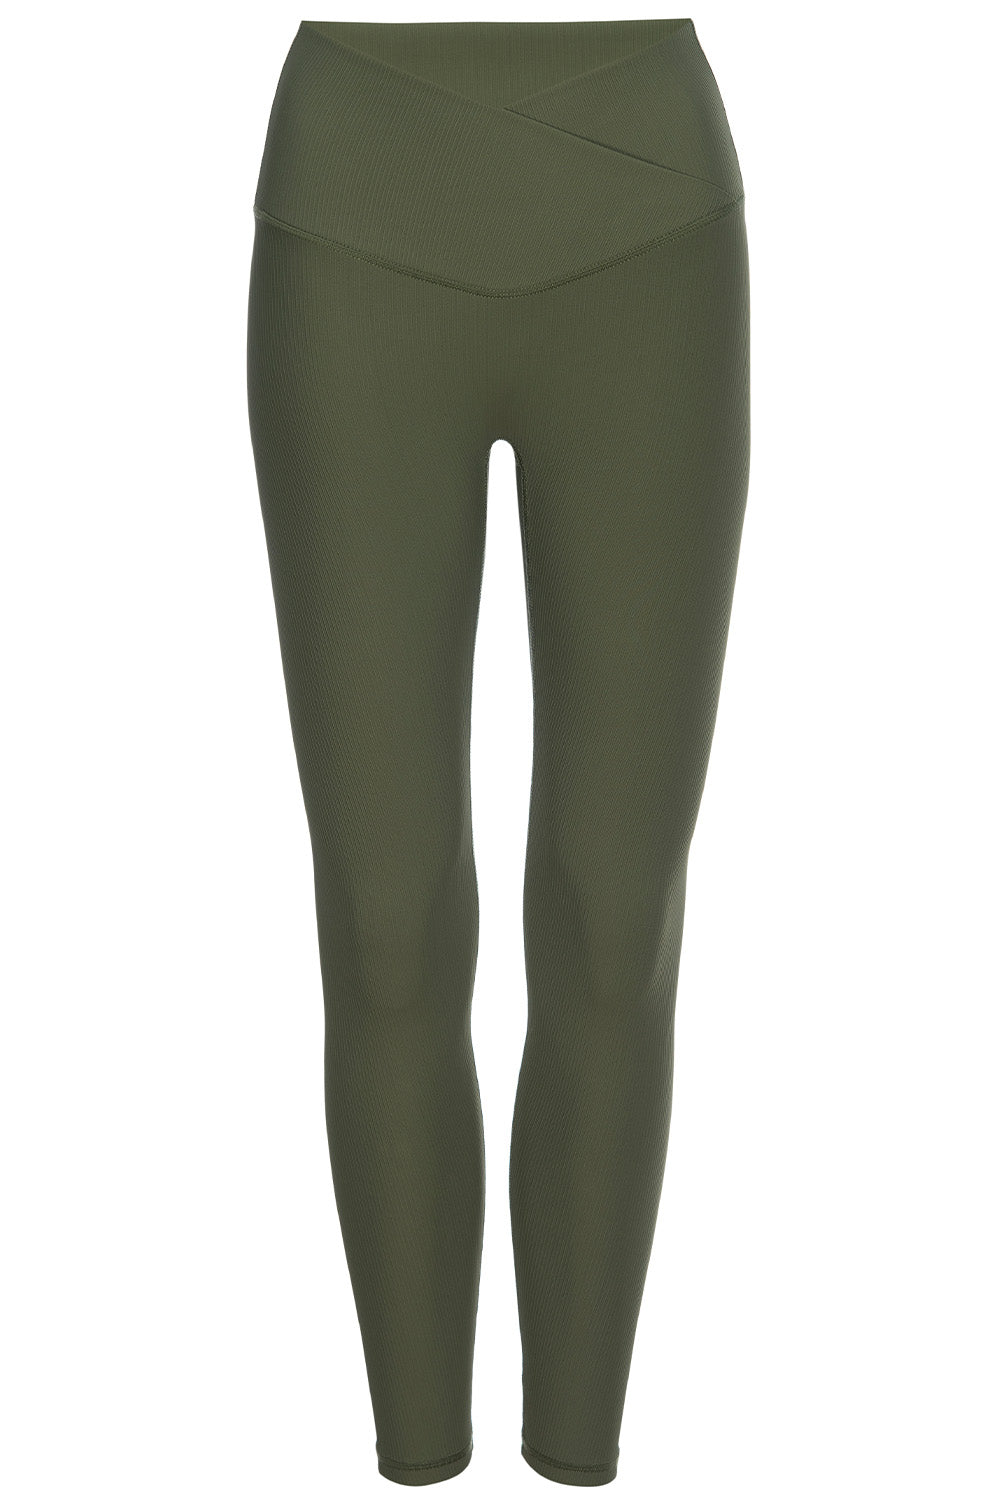 Melrose Army ribbed legging on white background front view.